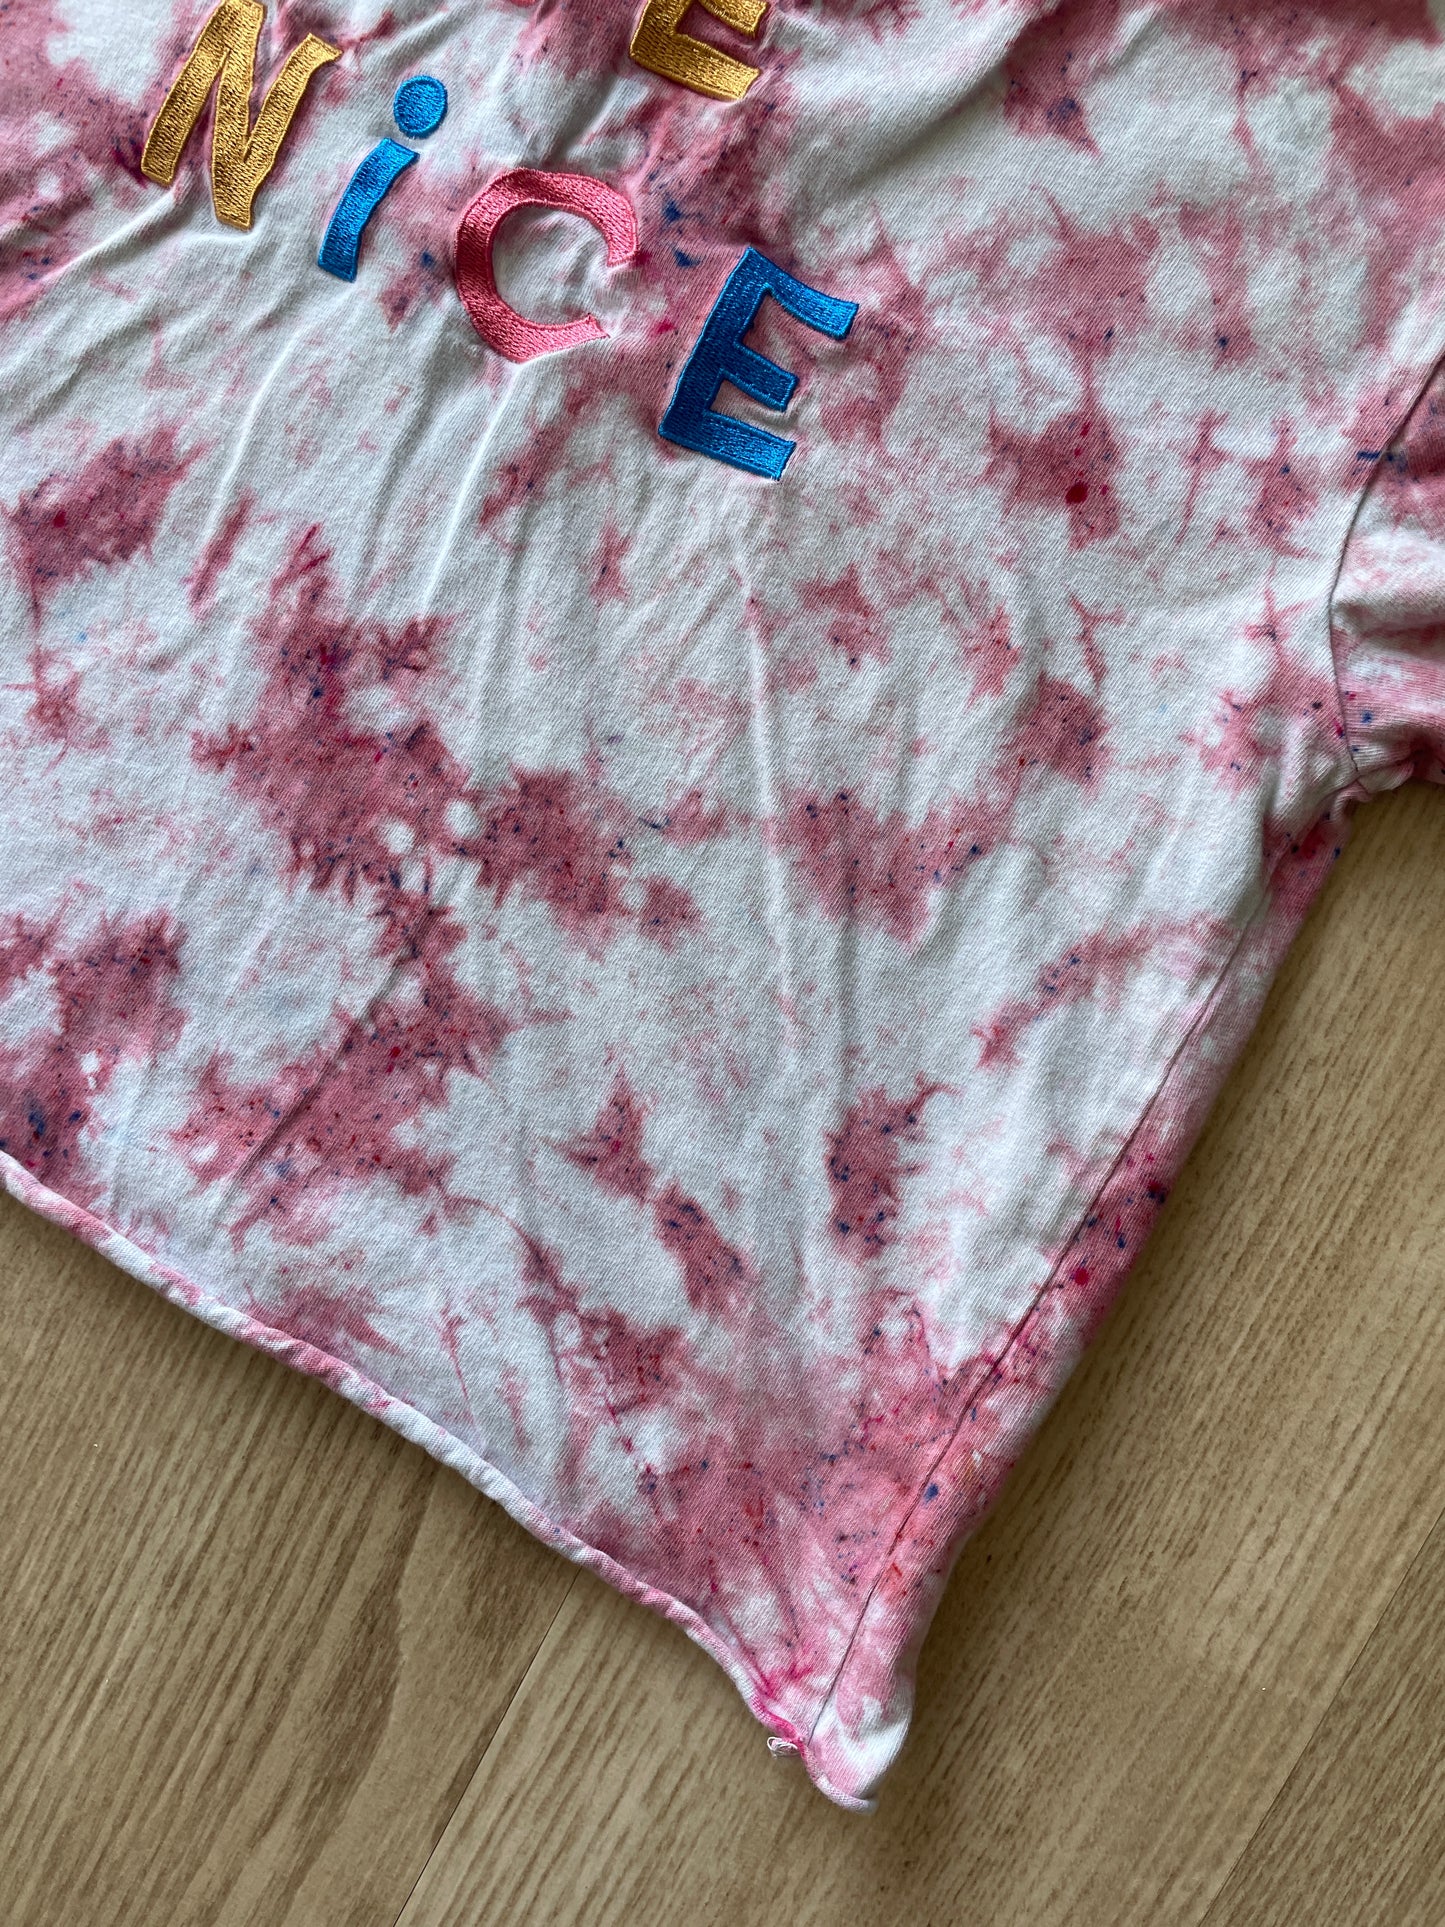 XS/S Women’s BE NICE Handmade Tie Dye Cropped T-Shirt | One-Of-a-Kind Pastel Pink Short Sleeve Crop Top